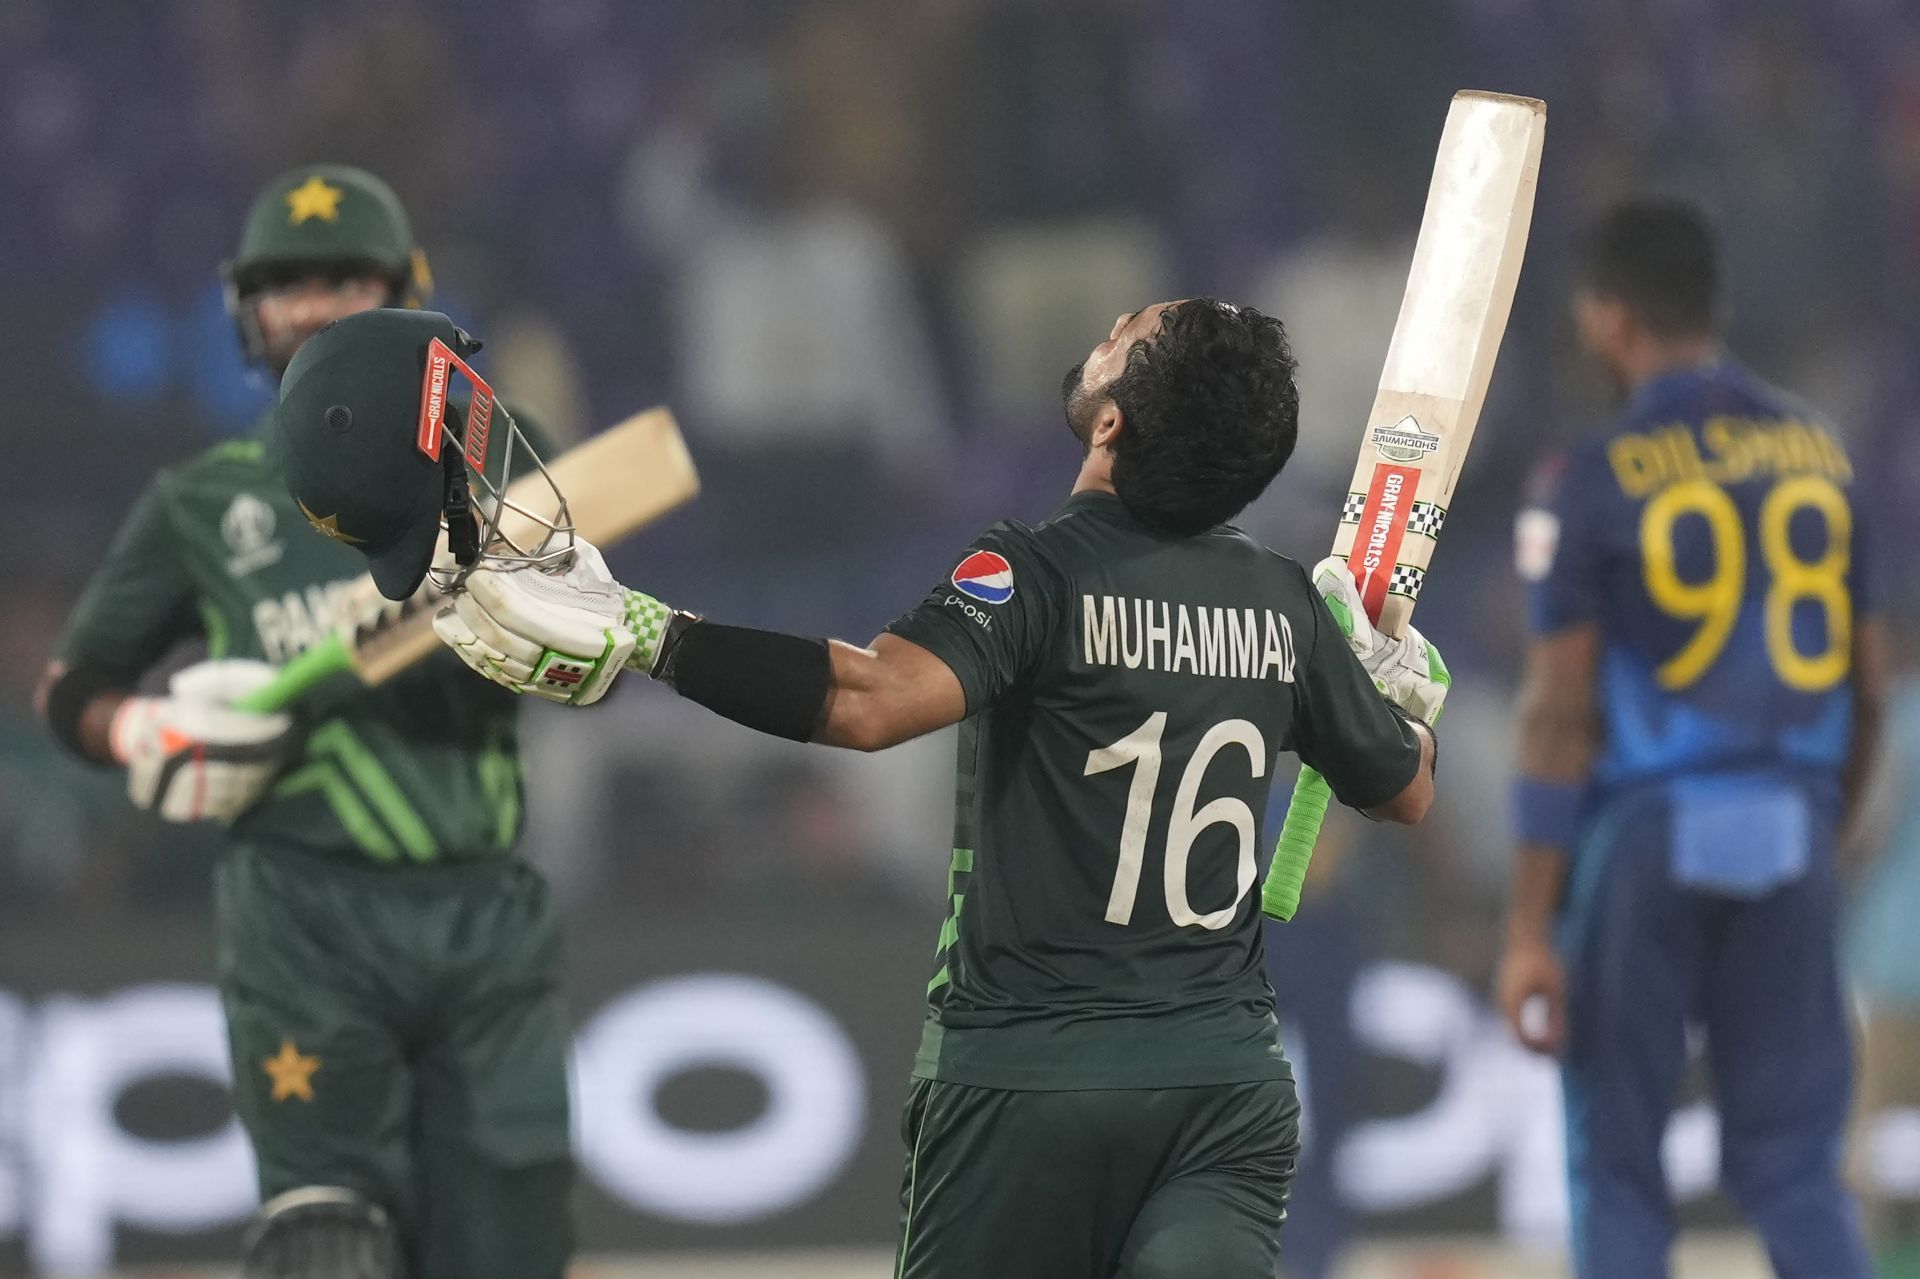 Pakistan have won both of their matches so far. (Pic: AP)